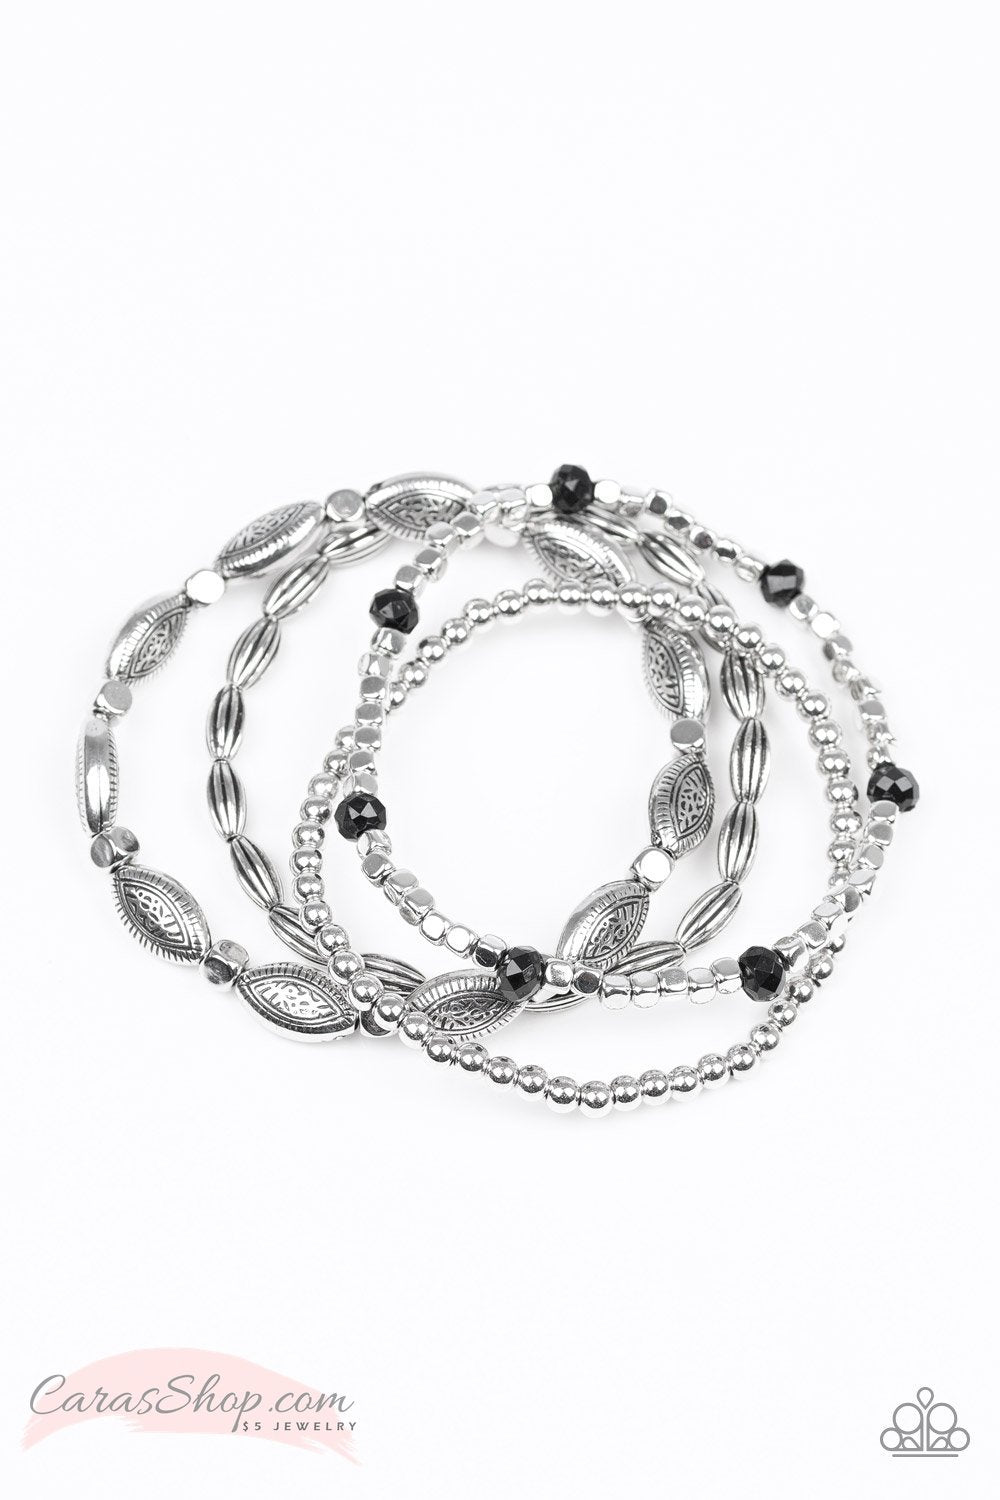 Full of WANDER Silver and Black Stretch Bracelet Set - Paparazzi Accessories-CarasShop.com - $5 Jewelry by Cara Jewels